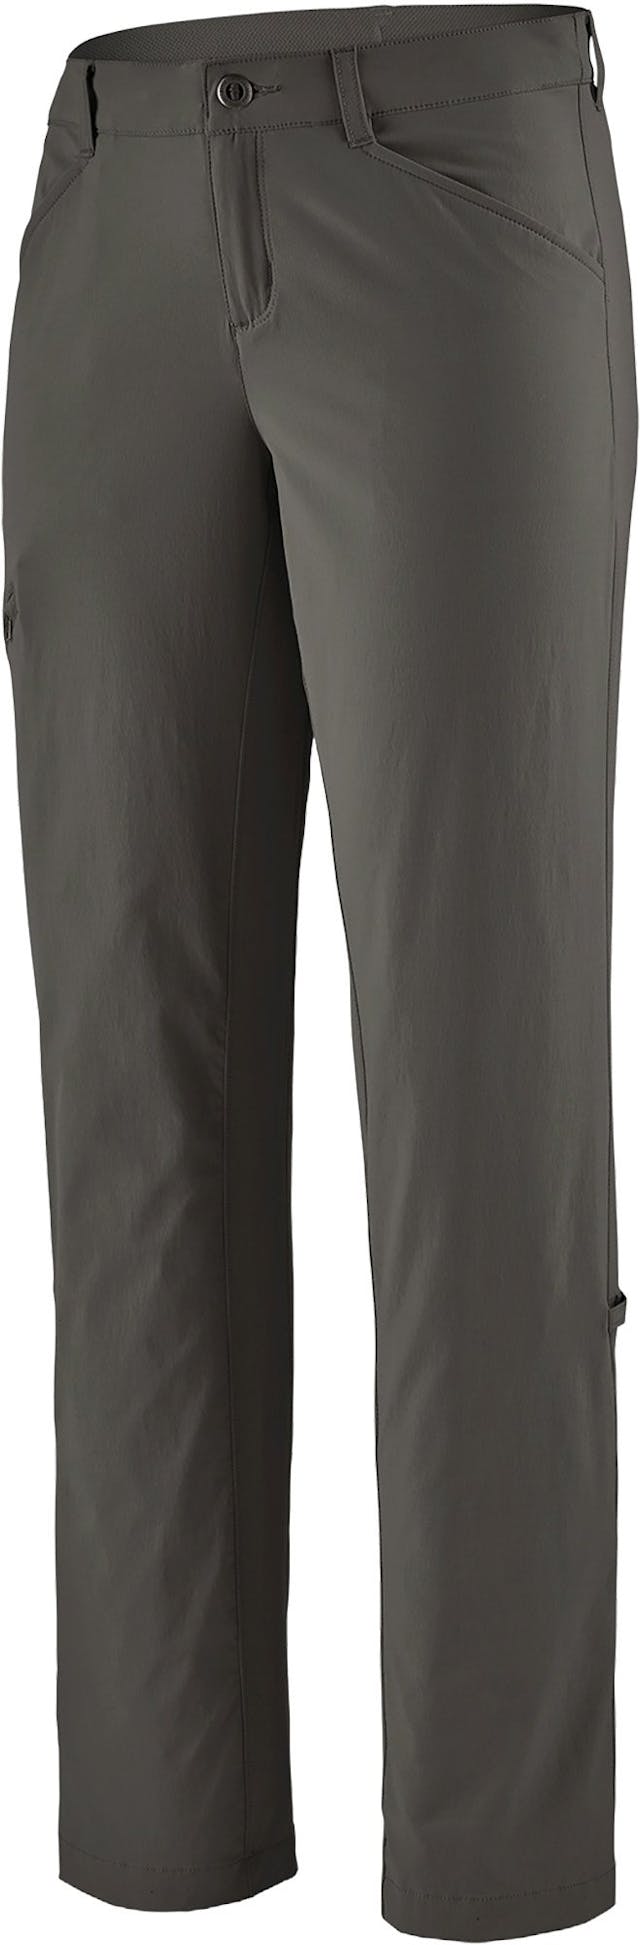 Product image for Quandary Pant - Short - Women's